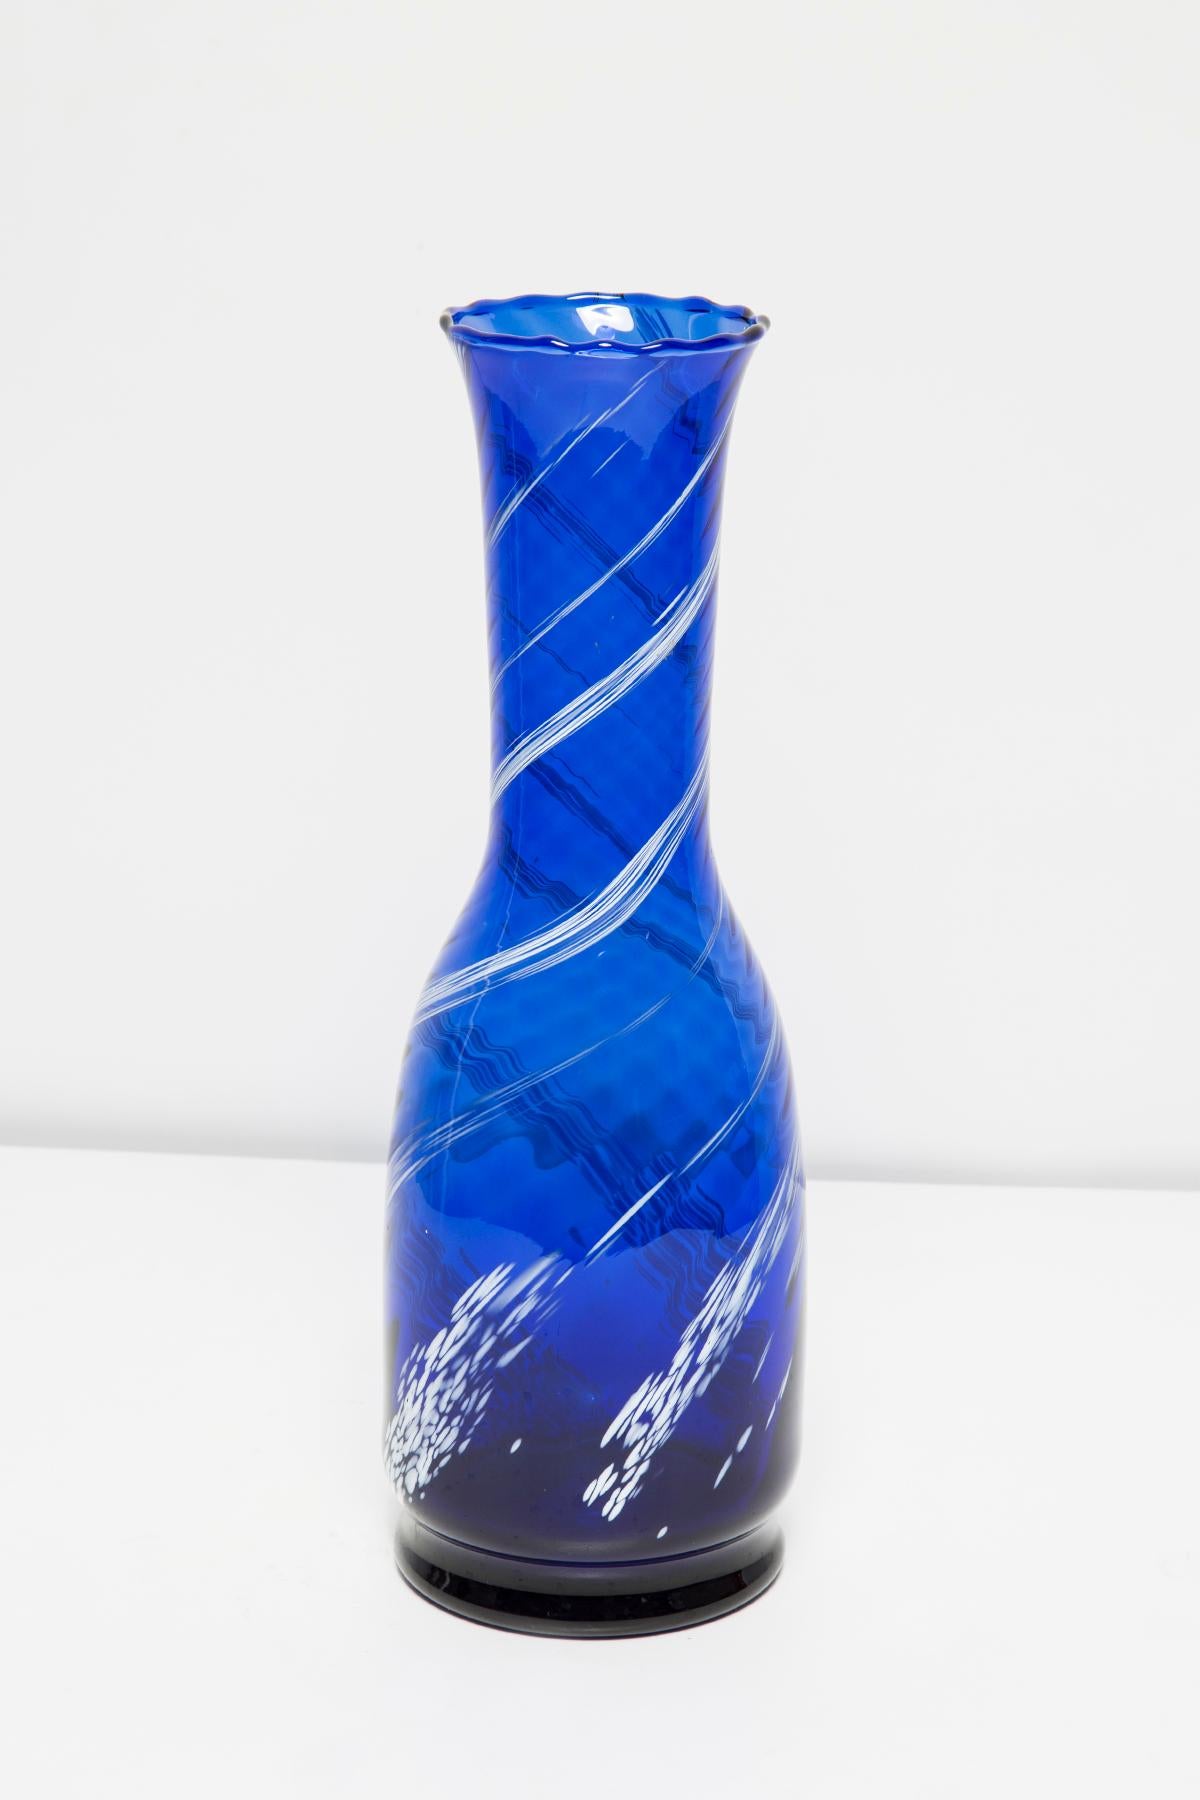 20th Century Mid Century Vintage Blue and White Artistic Glass Vase Bottle, Europe, 1970s For Sale